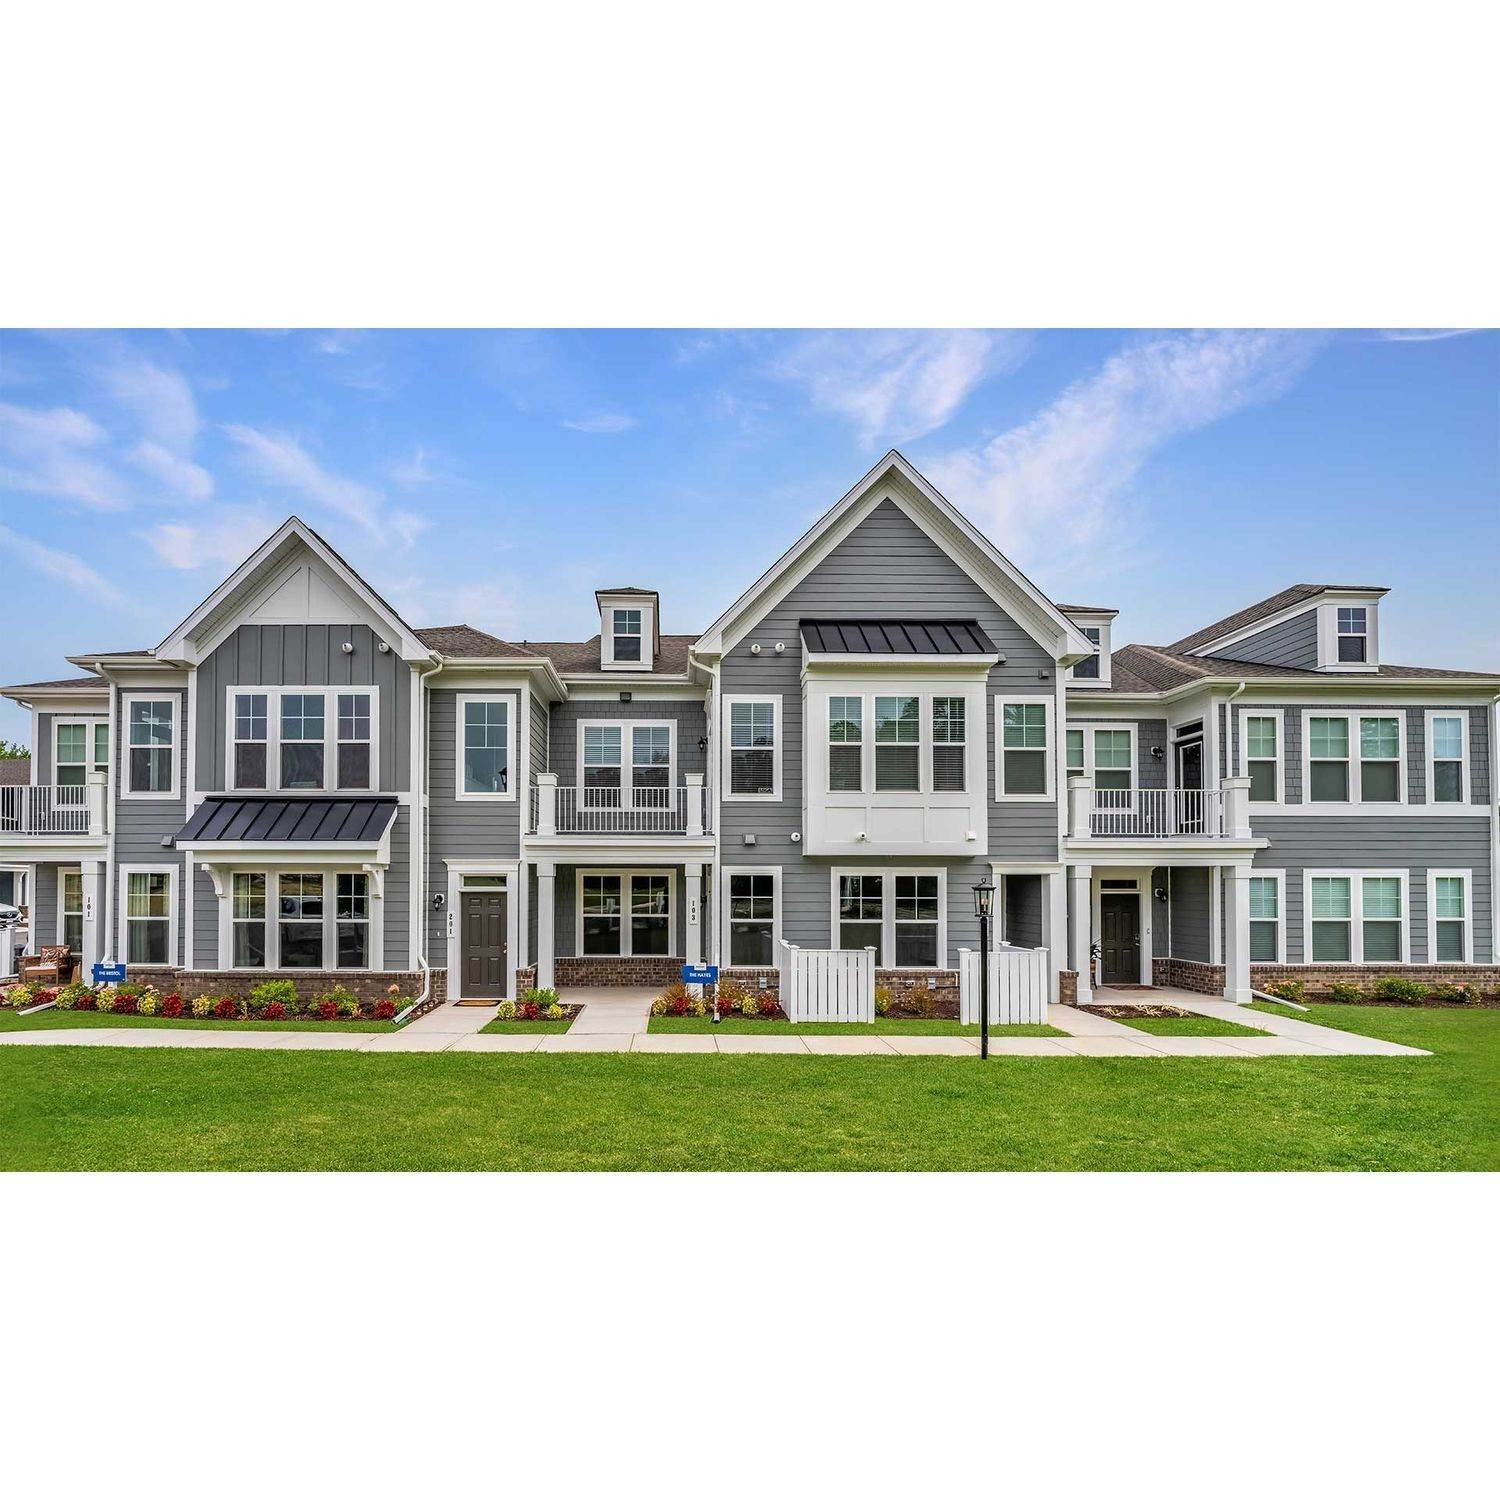 4. The Pointe at Twin Hickory xây dựng tại 4605 Pouncey Tract Road, Glen Allen, VA 23059